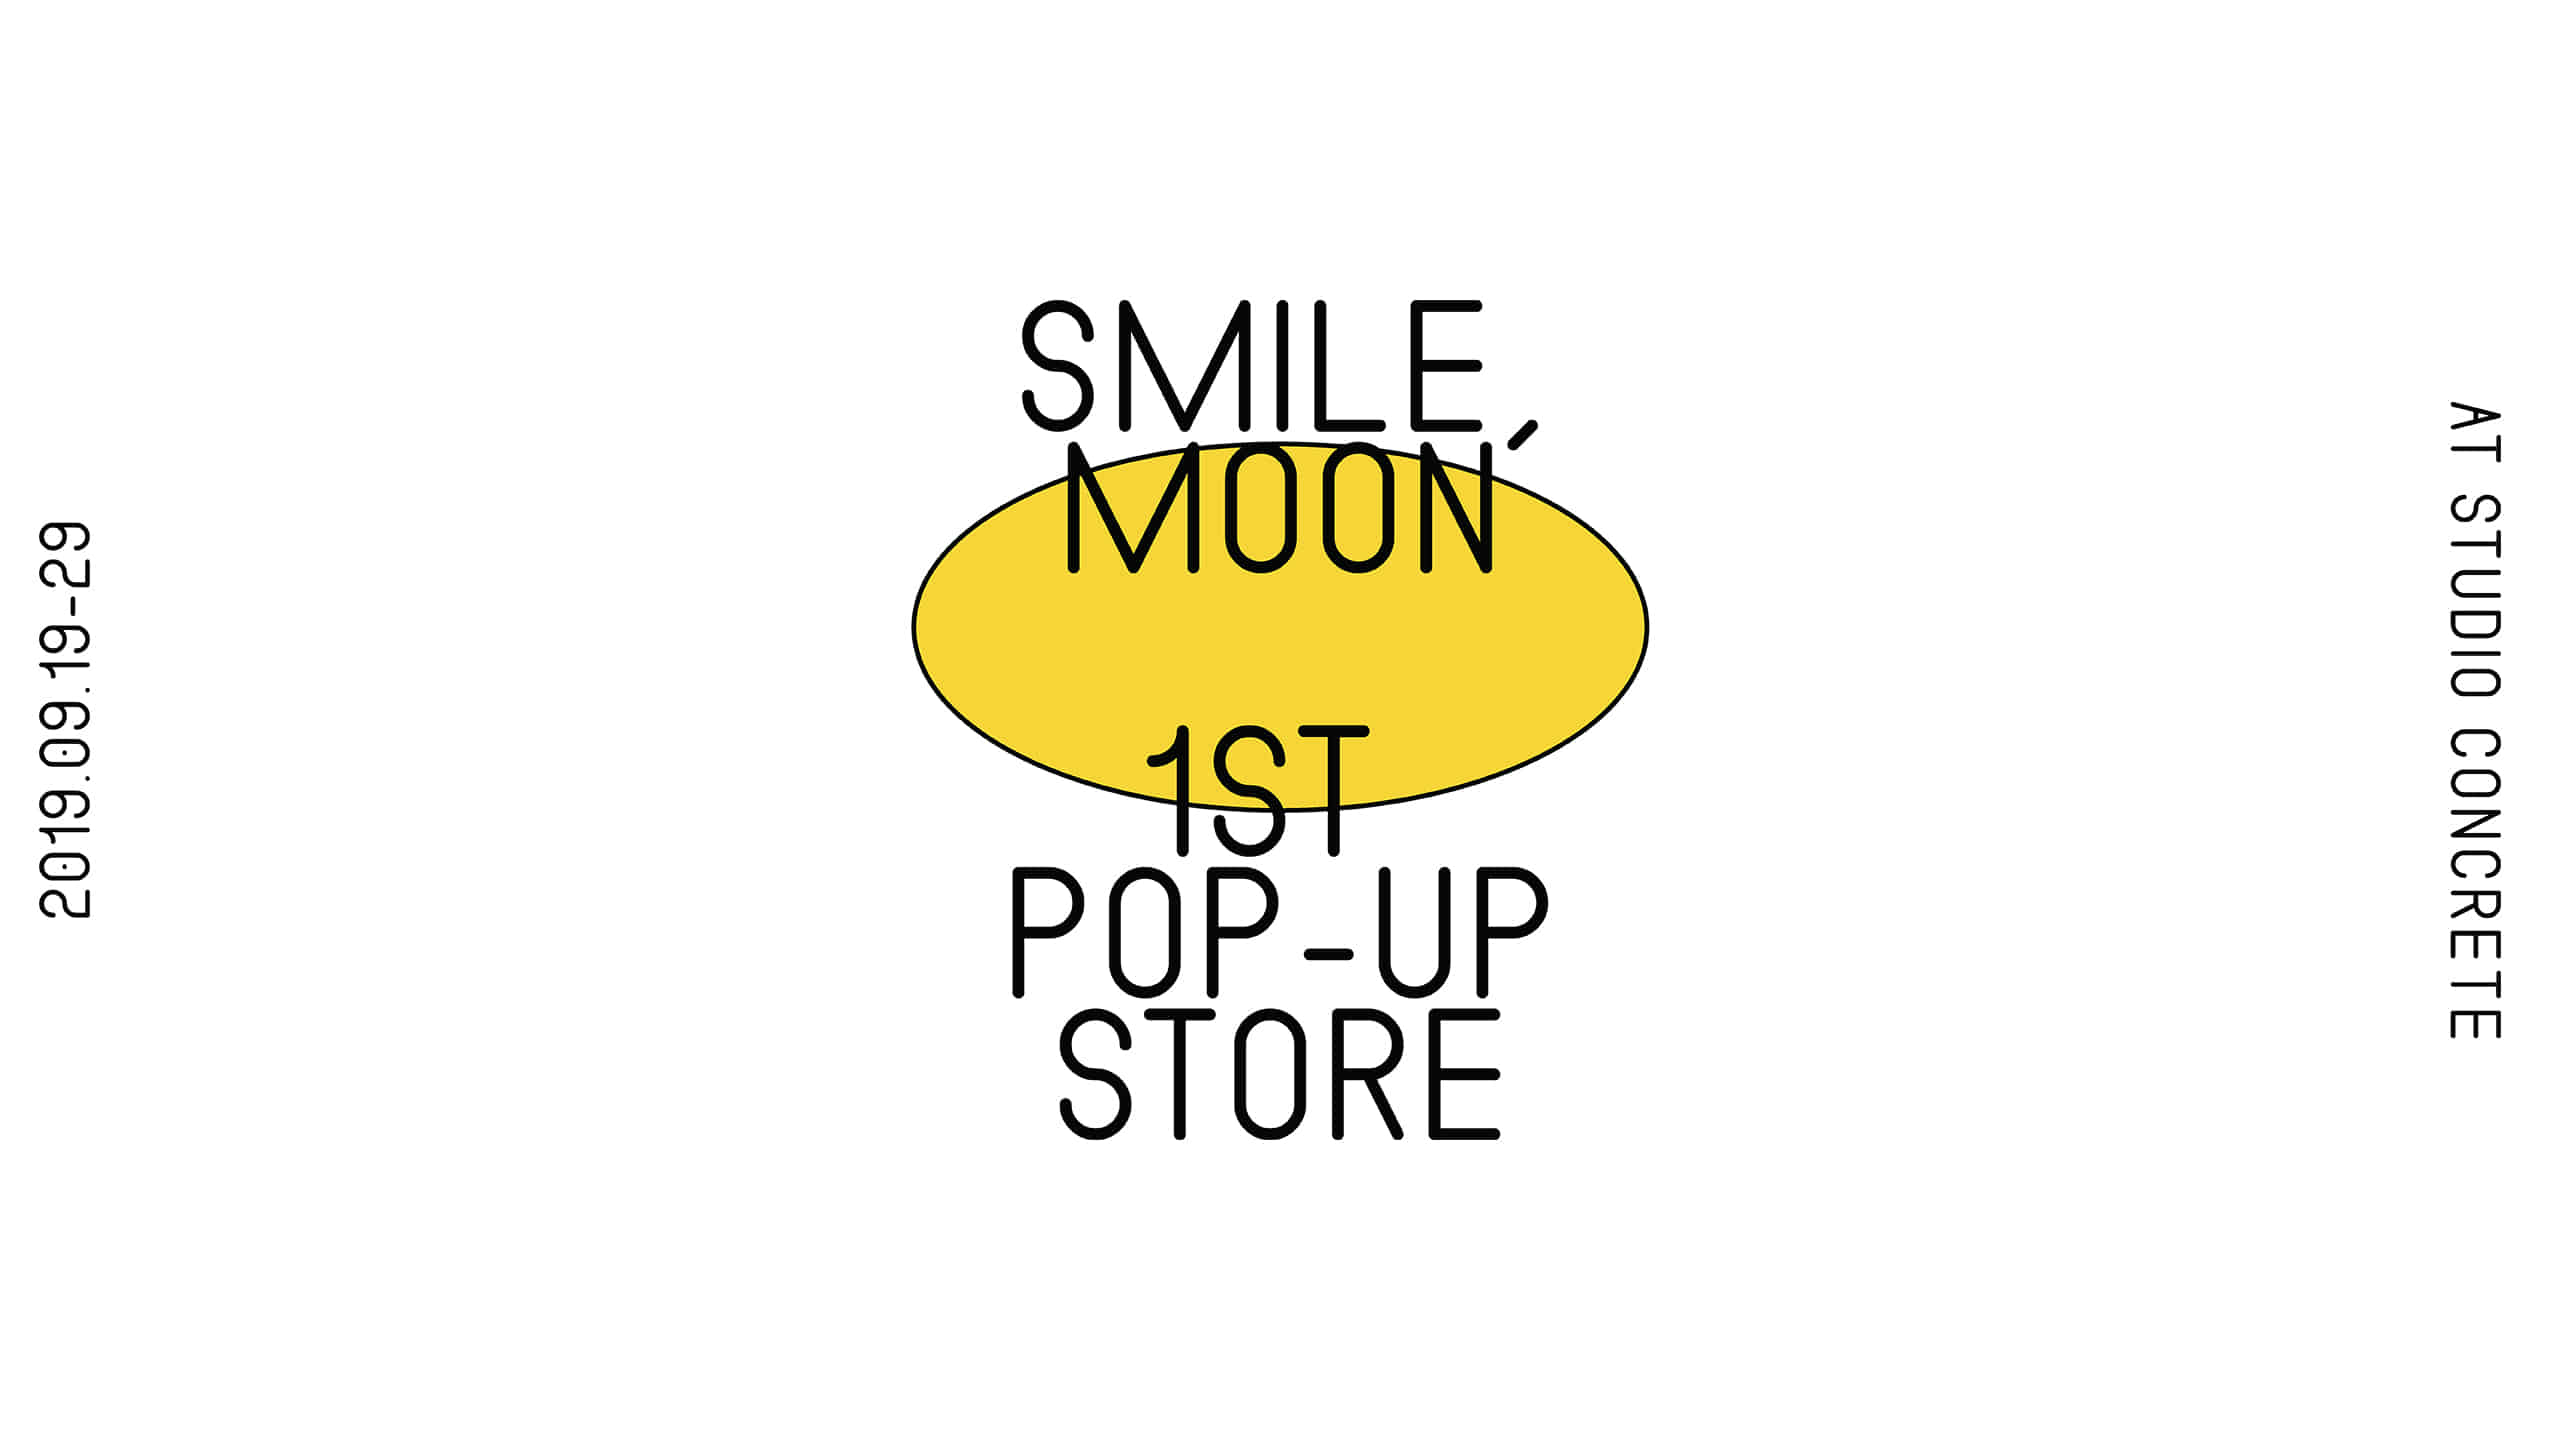 smile, moon 1st pop-up store sketch